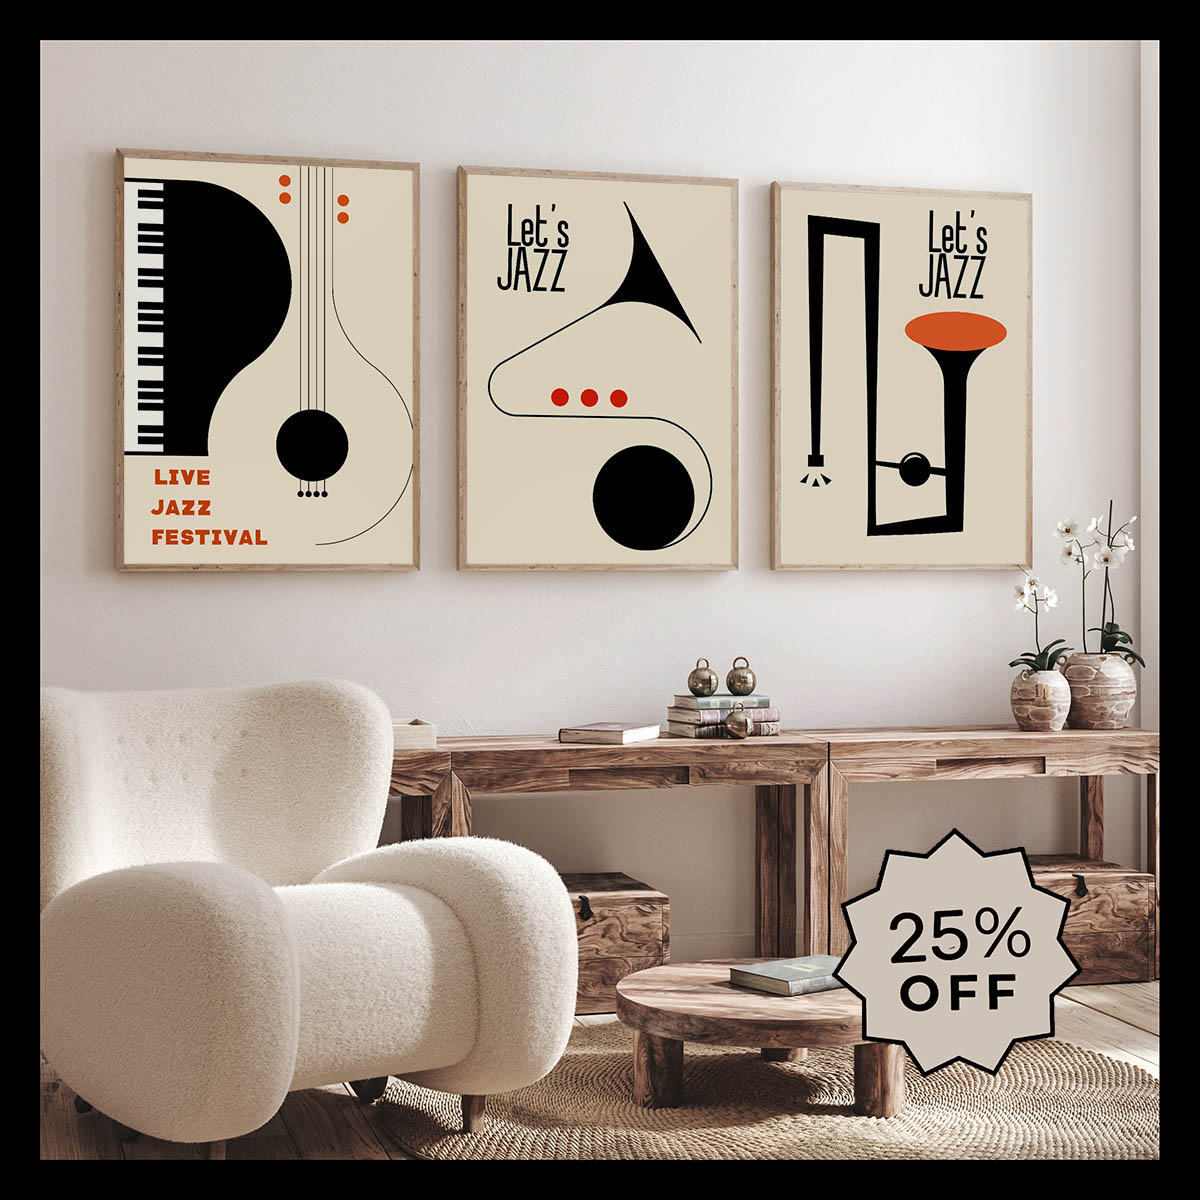 Elegant jazz-themed poster designs showcasing instruments with 'Live Jazz Festival' and 'Let's Jazz' texts, displayed in a modern living room setting.